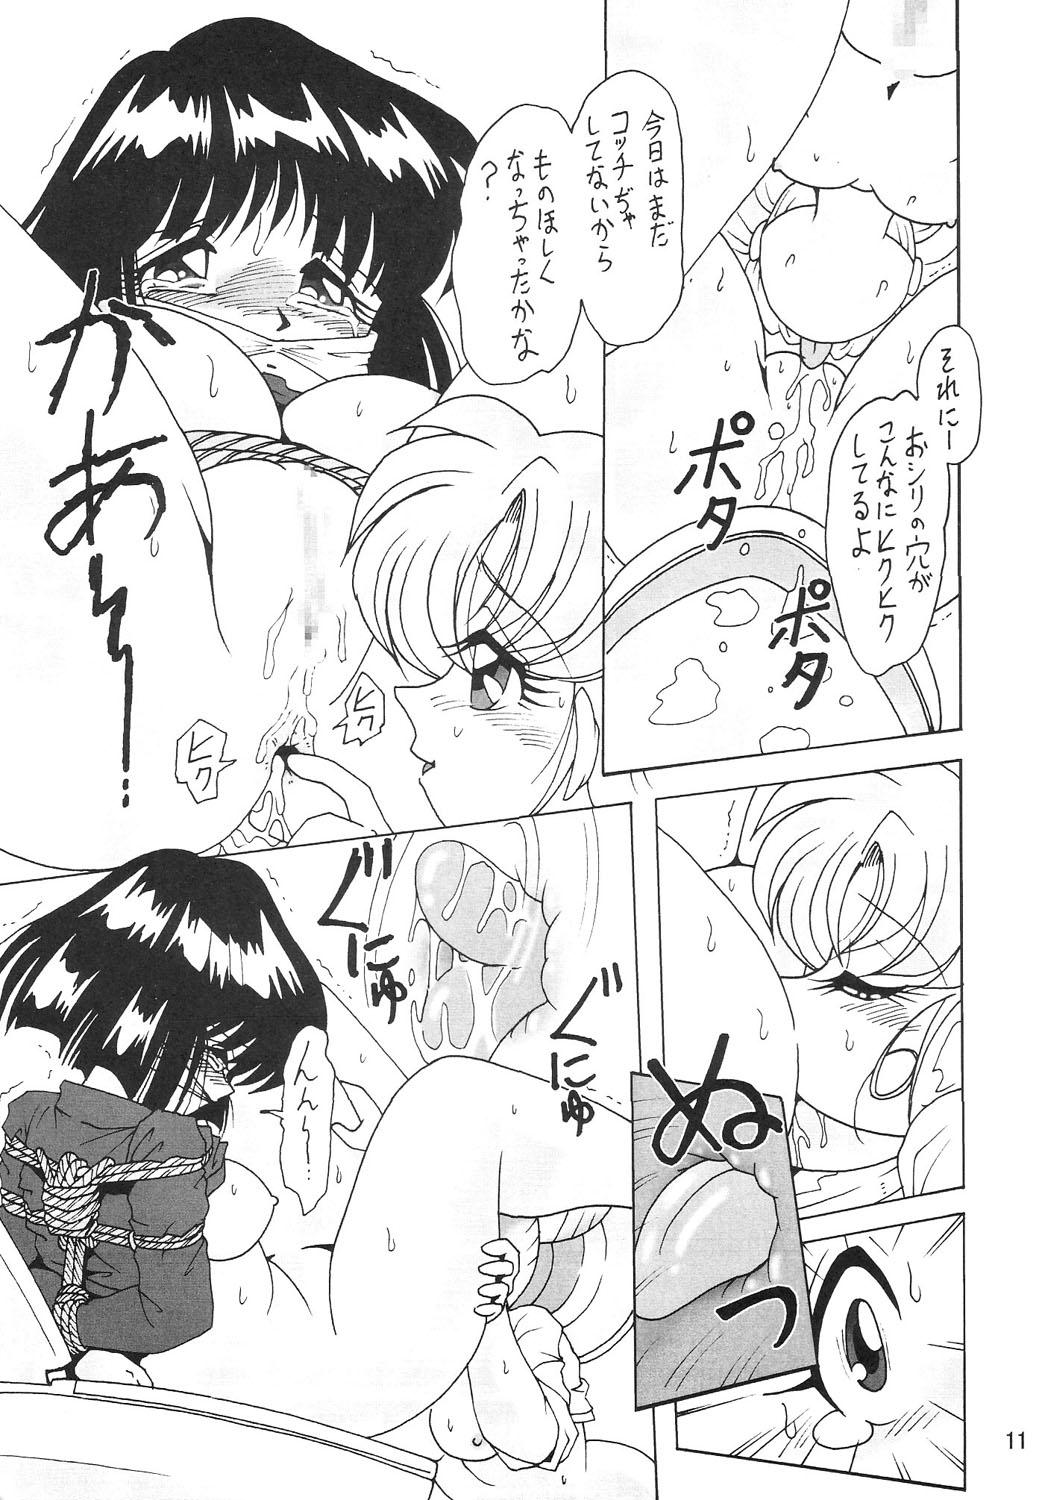 Dick Sucking Silent Saturn SS vol. 6 - Sailor moon Russian - Page 11